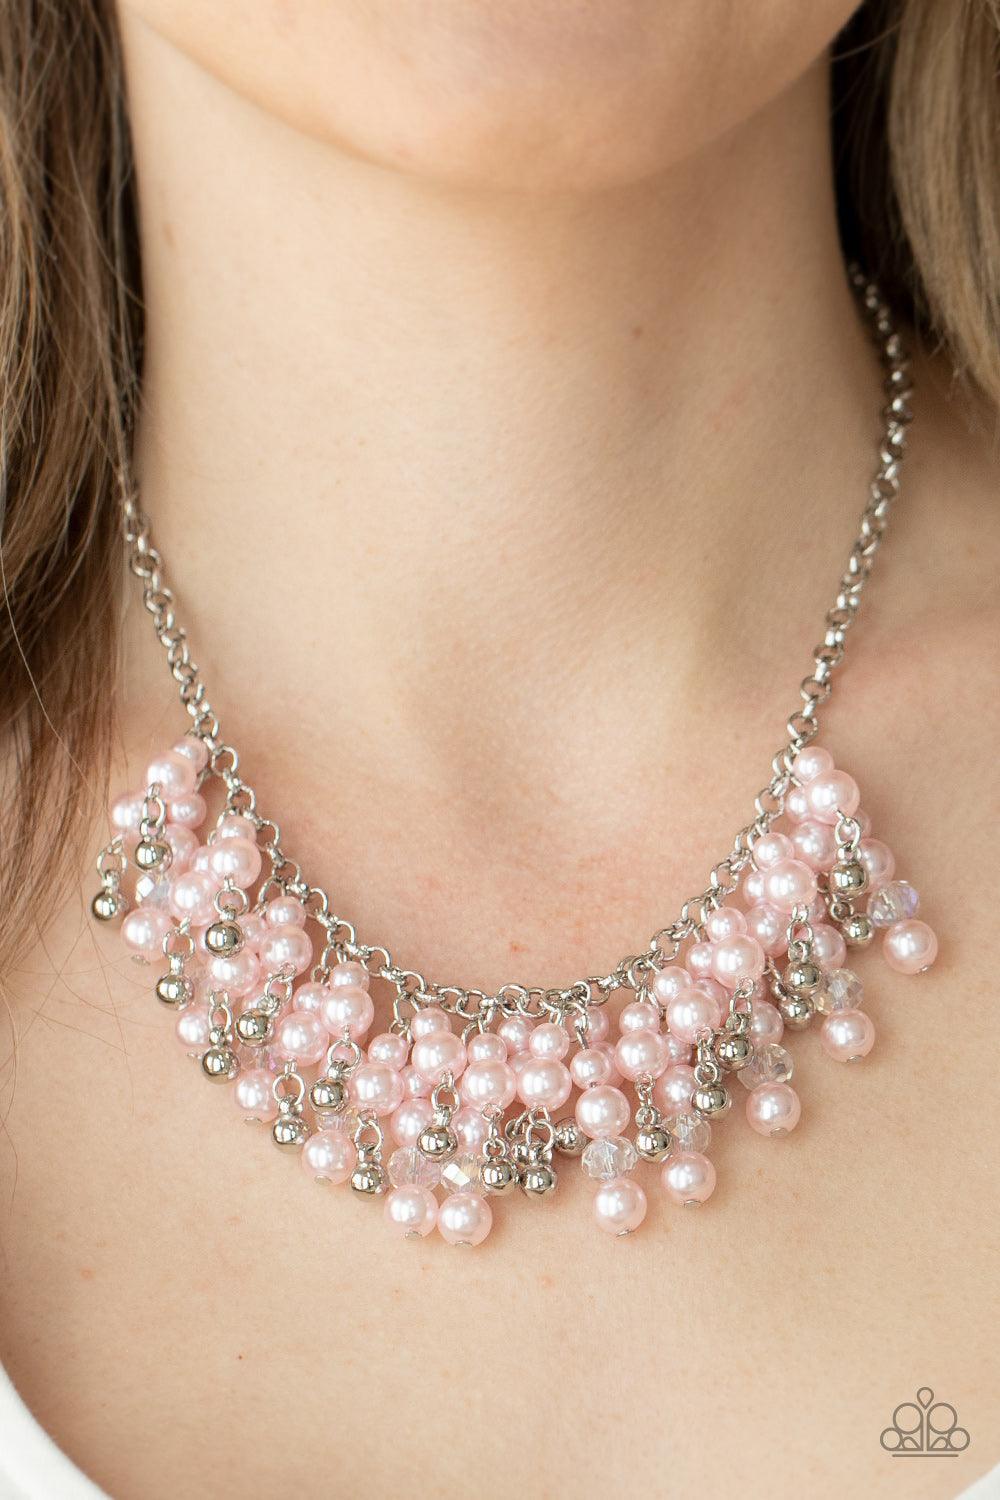 Paparazzi Accessories Champagne Dreams - Pink A bubbly collection of pink pearls, silver beads, and sparkly crystal-like beads are threaded along metallic rods that trickle from the bottom of a shimmery silver chain, creating an elegantly effervescent fri